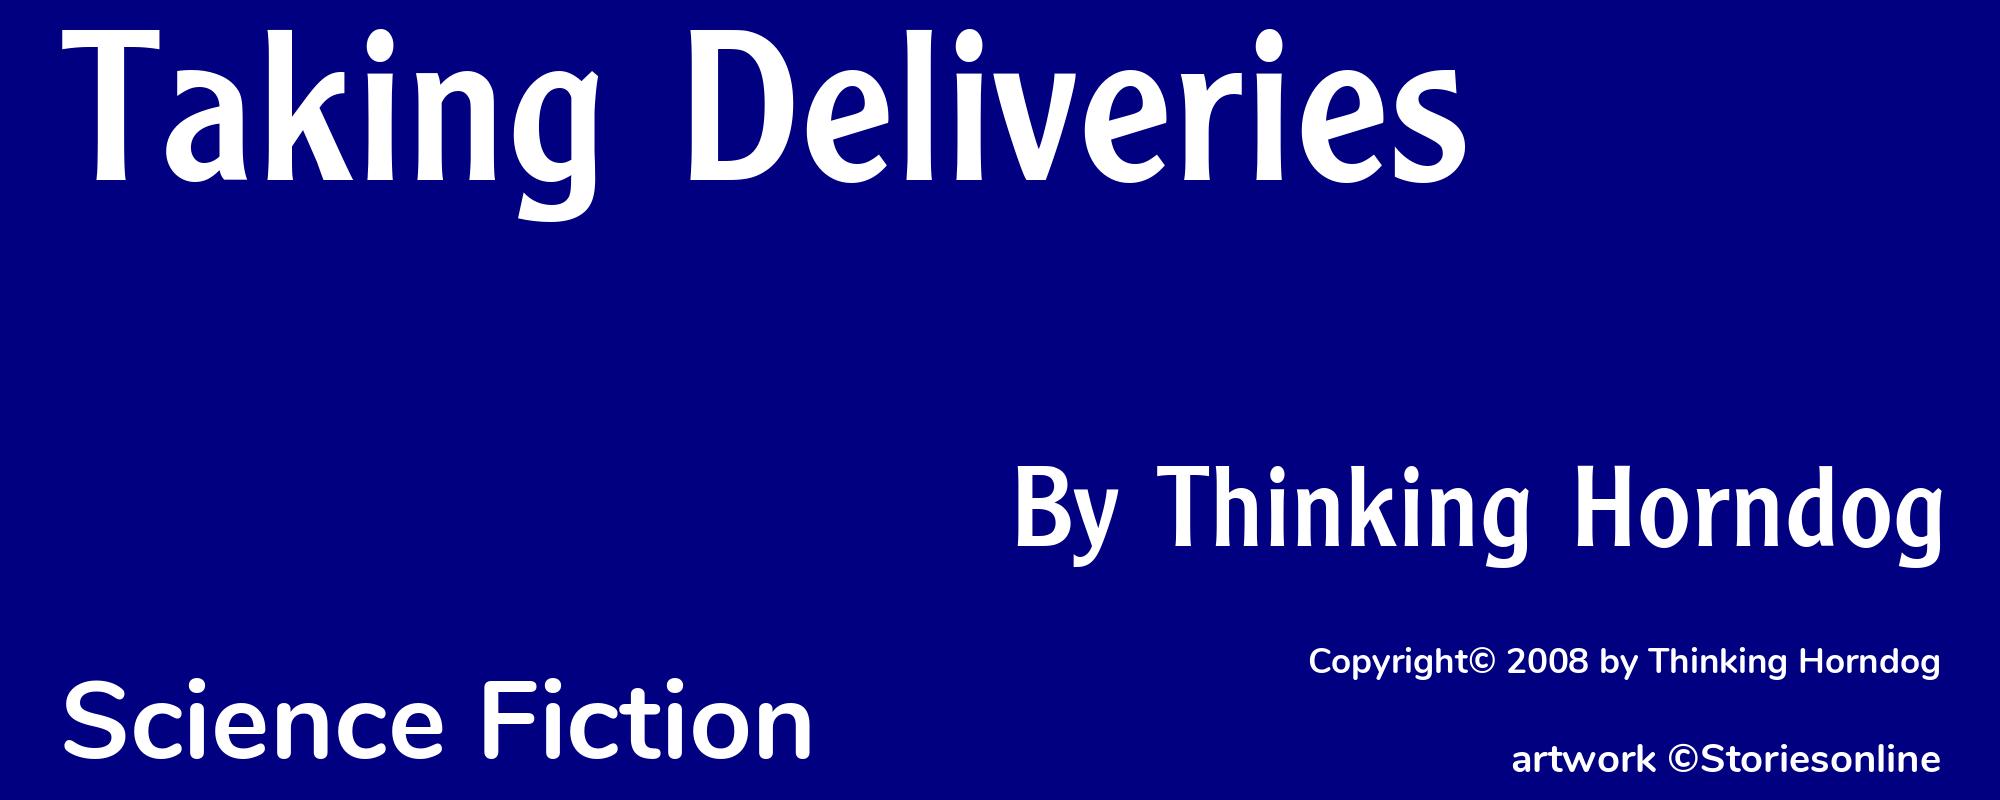 Taking Deliveries - Cover